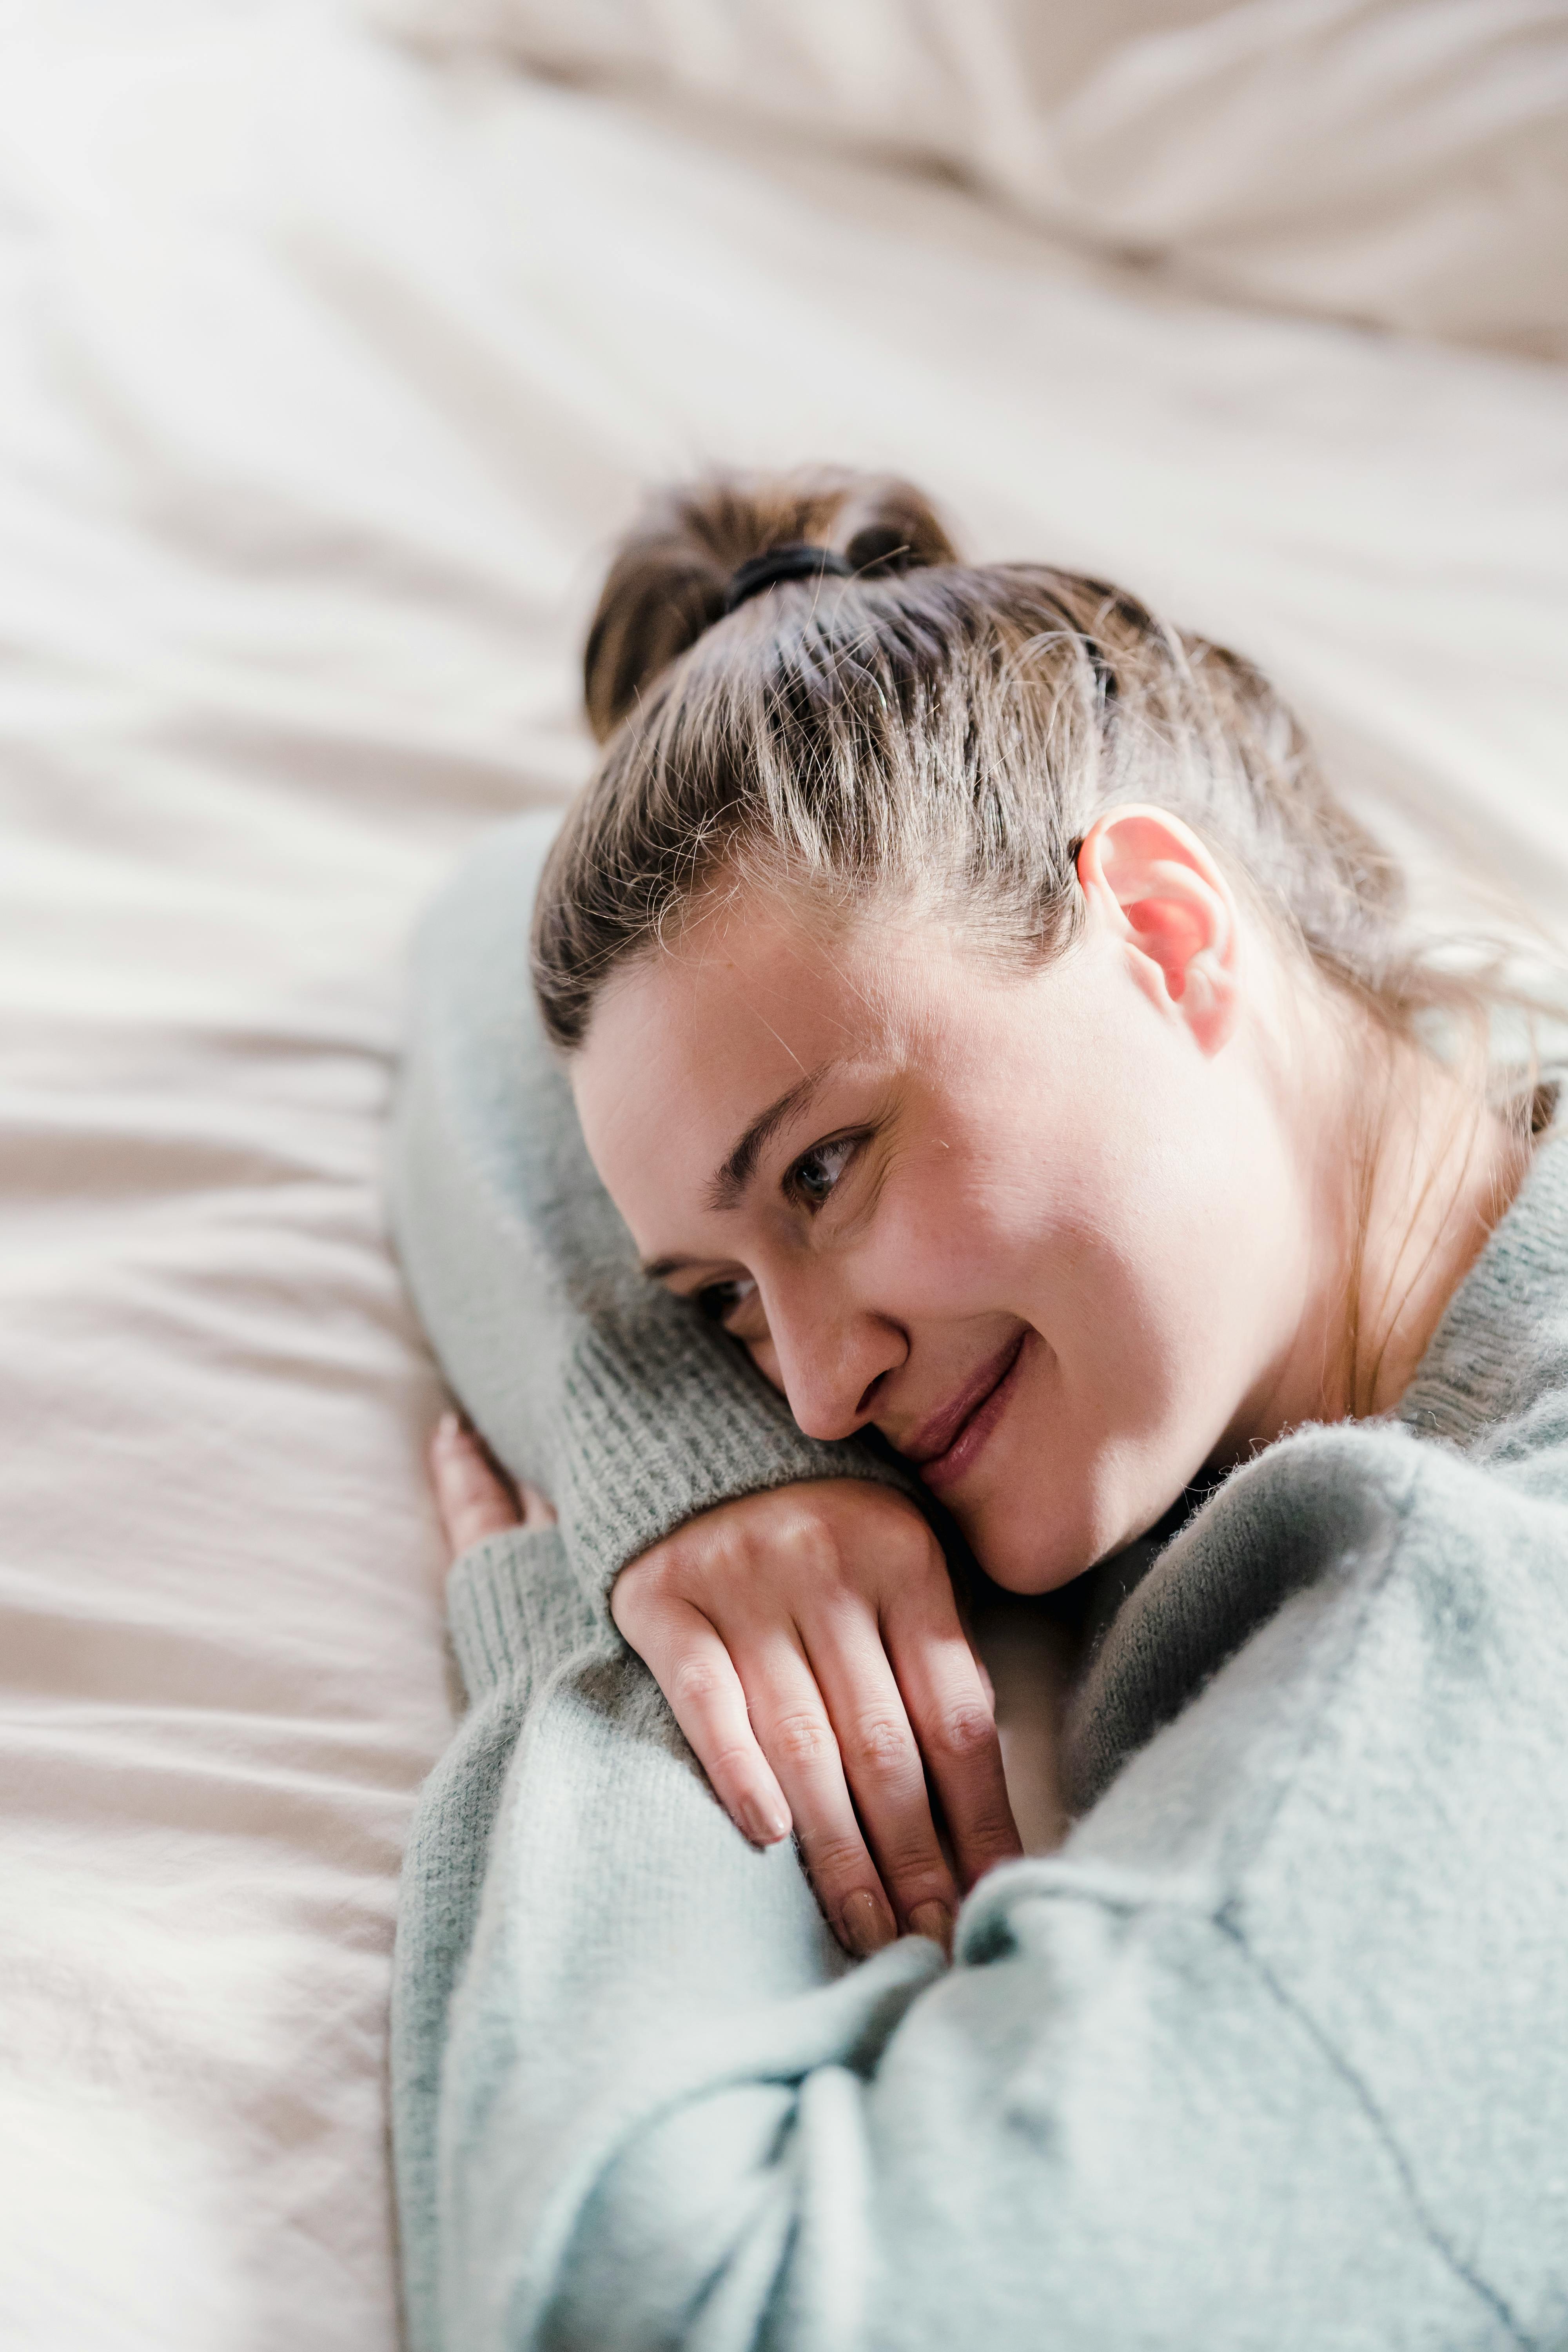 A happy woman lying on a bed while thinking | Source: Pexels